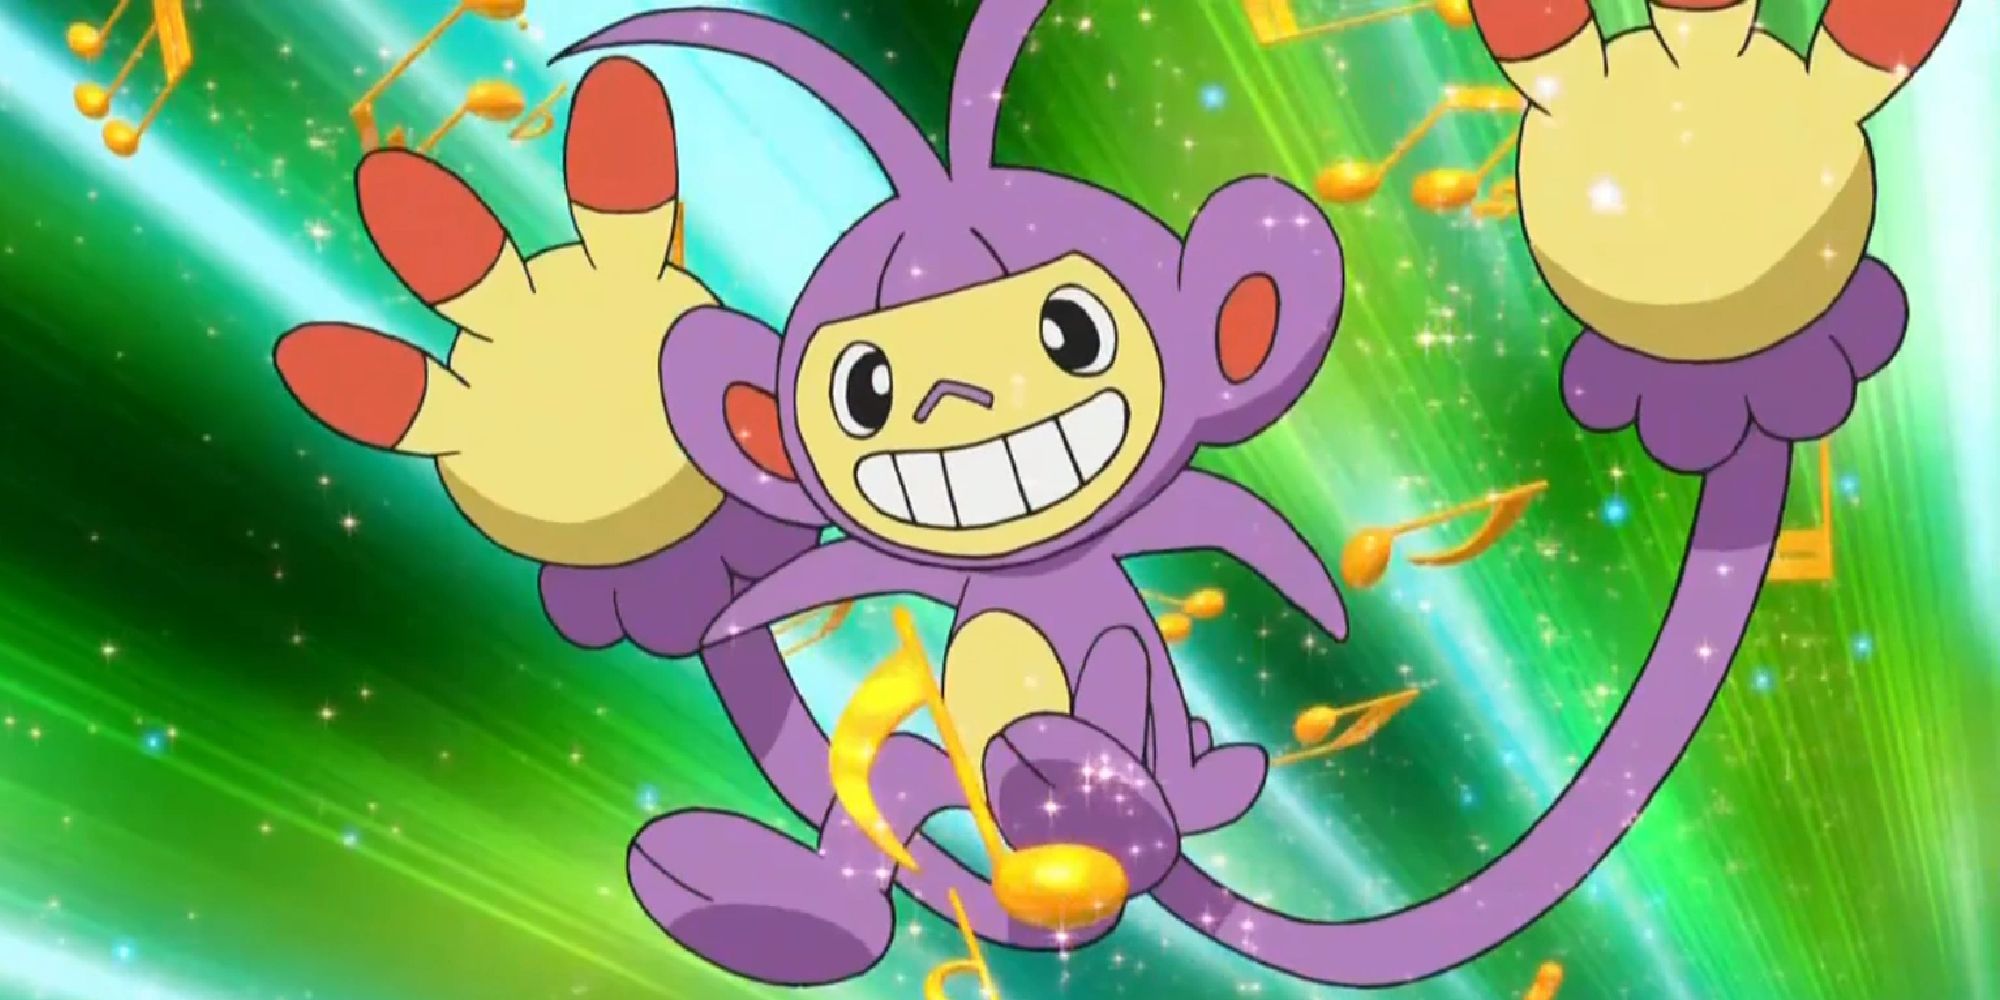 Ambipom in battle surrounded by musical notes in the anime